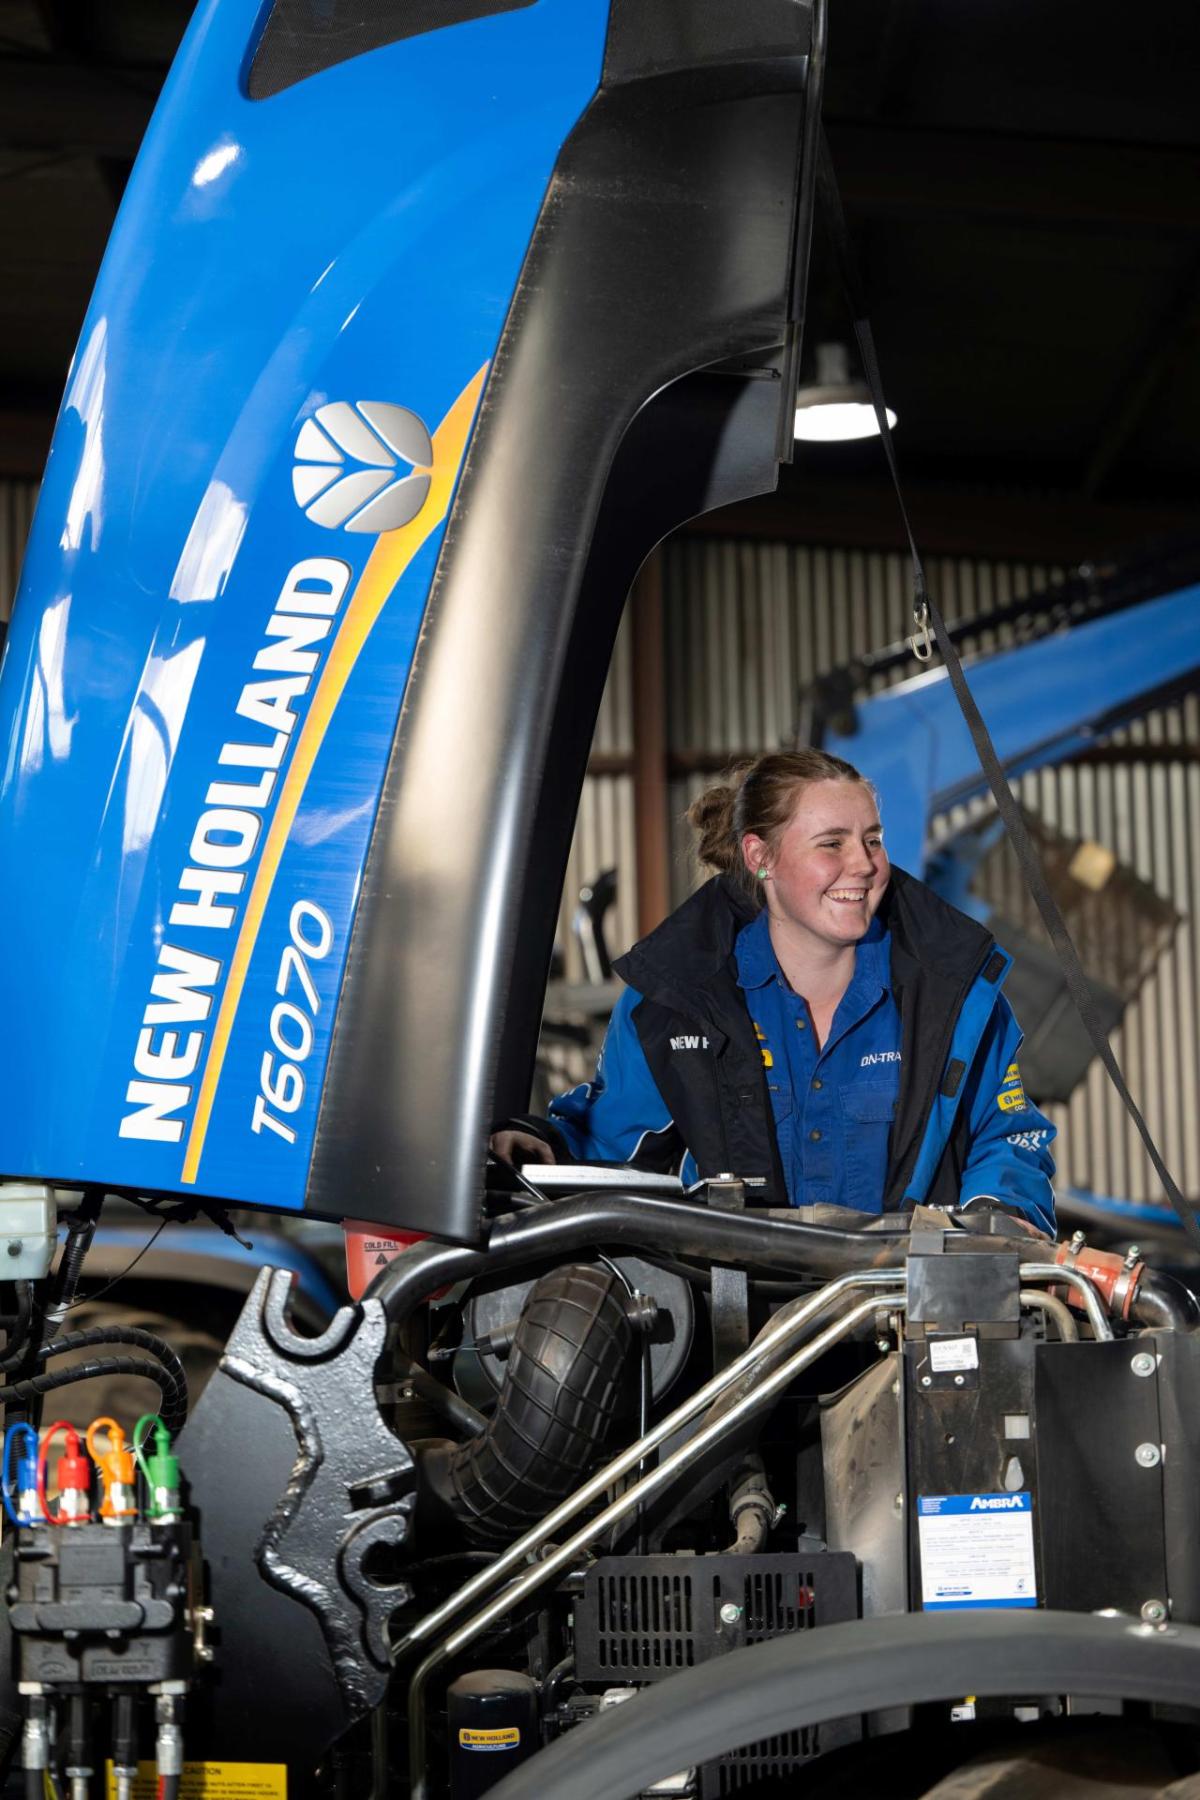 A smiling person looking under the hood of a farming tractor.